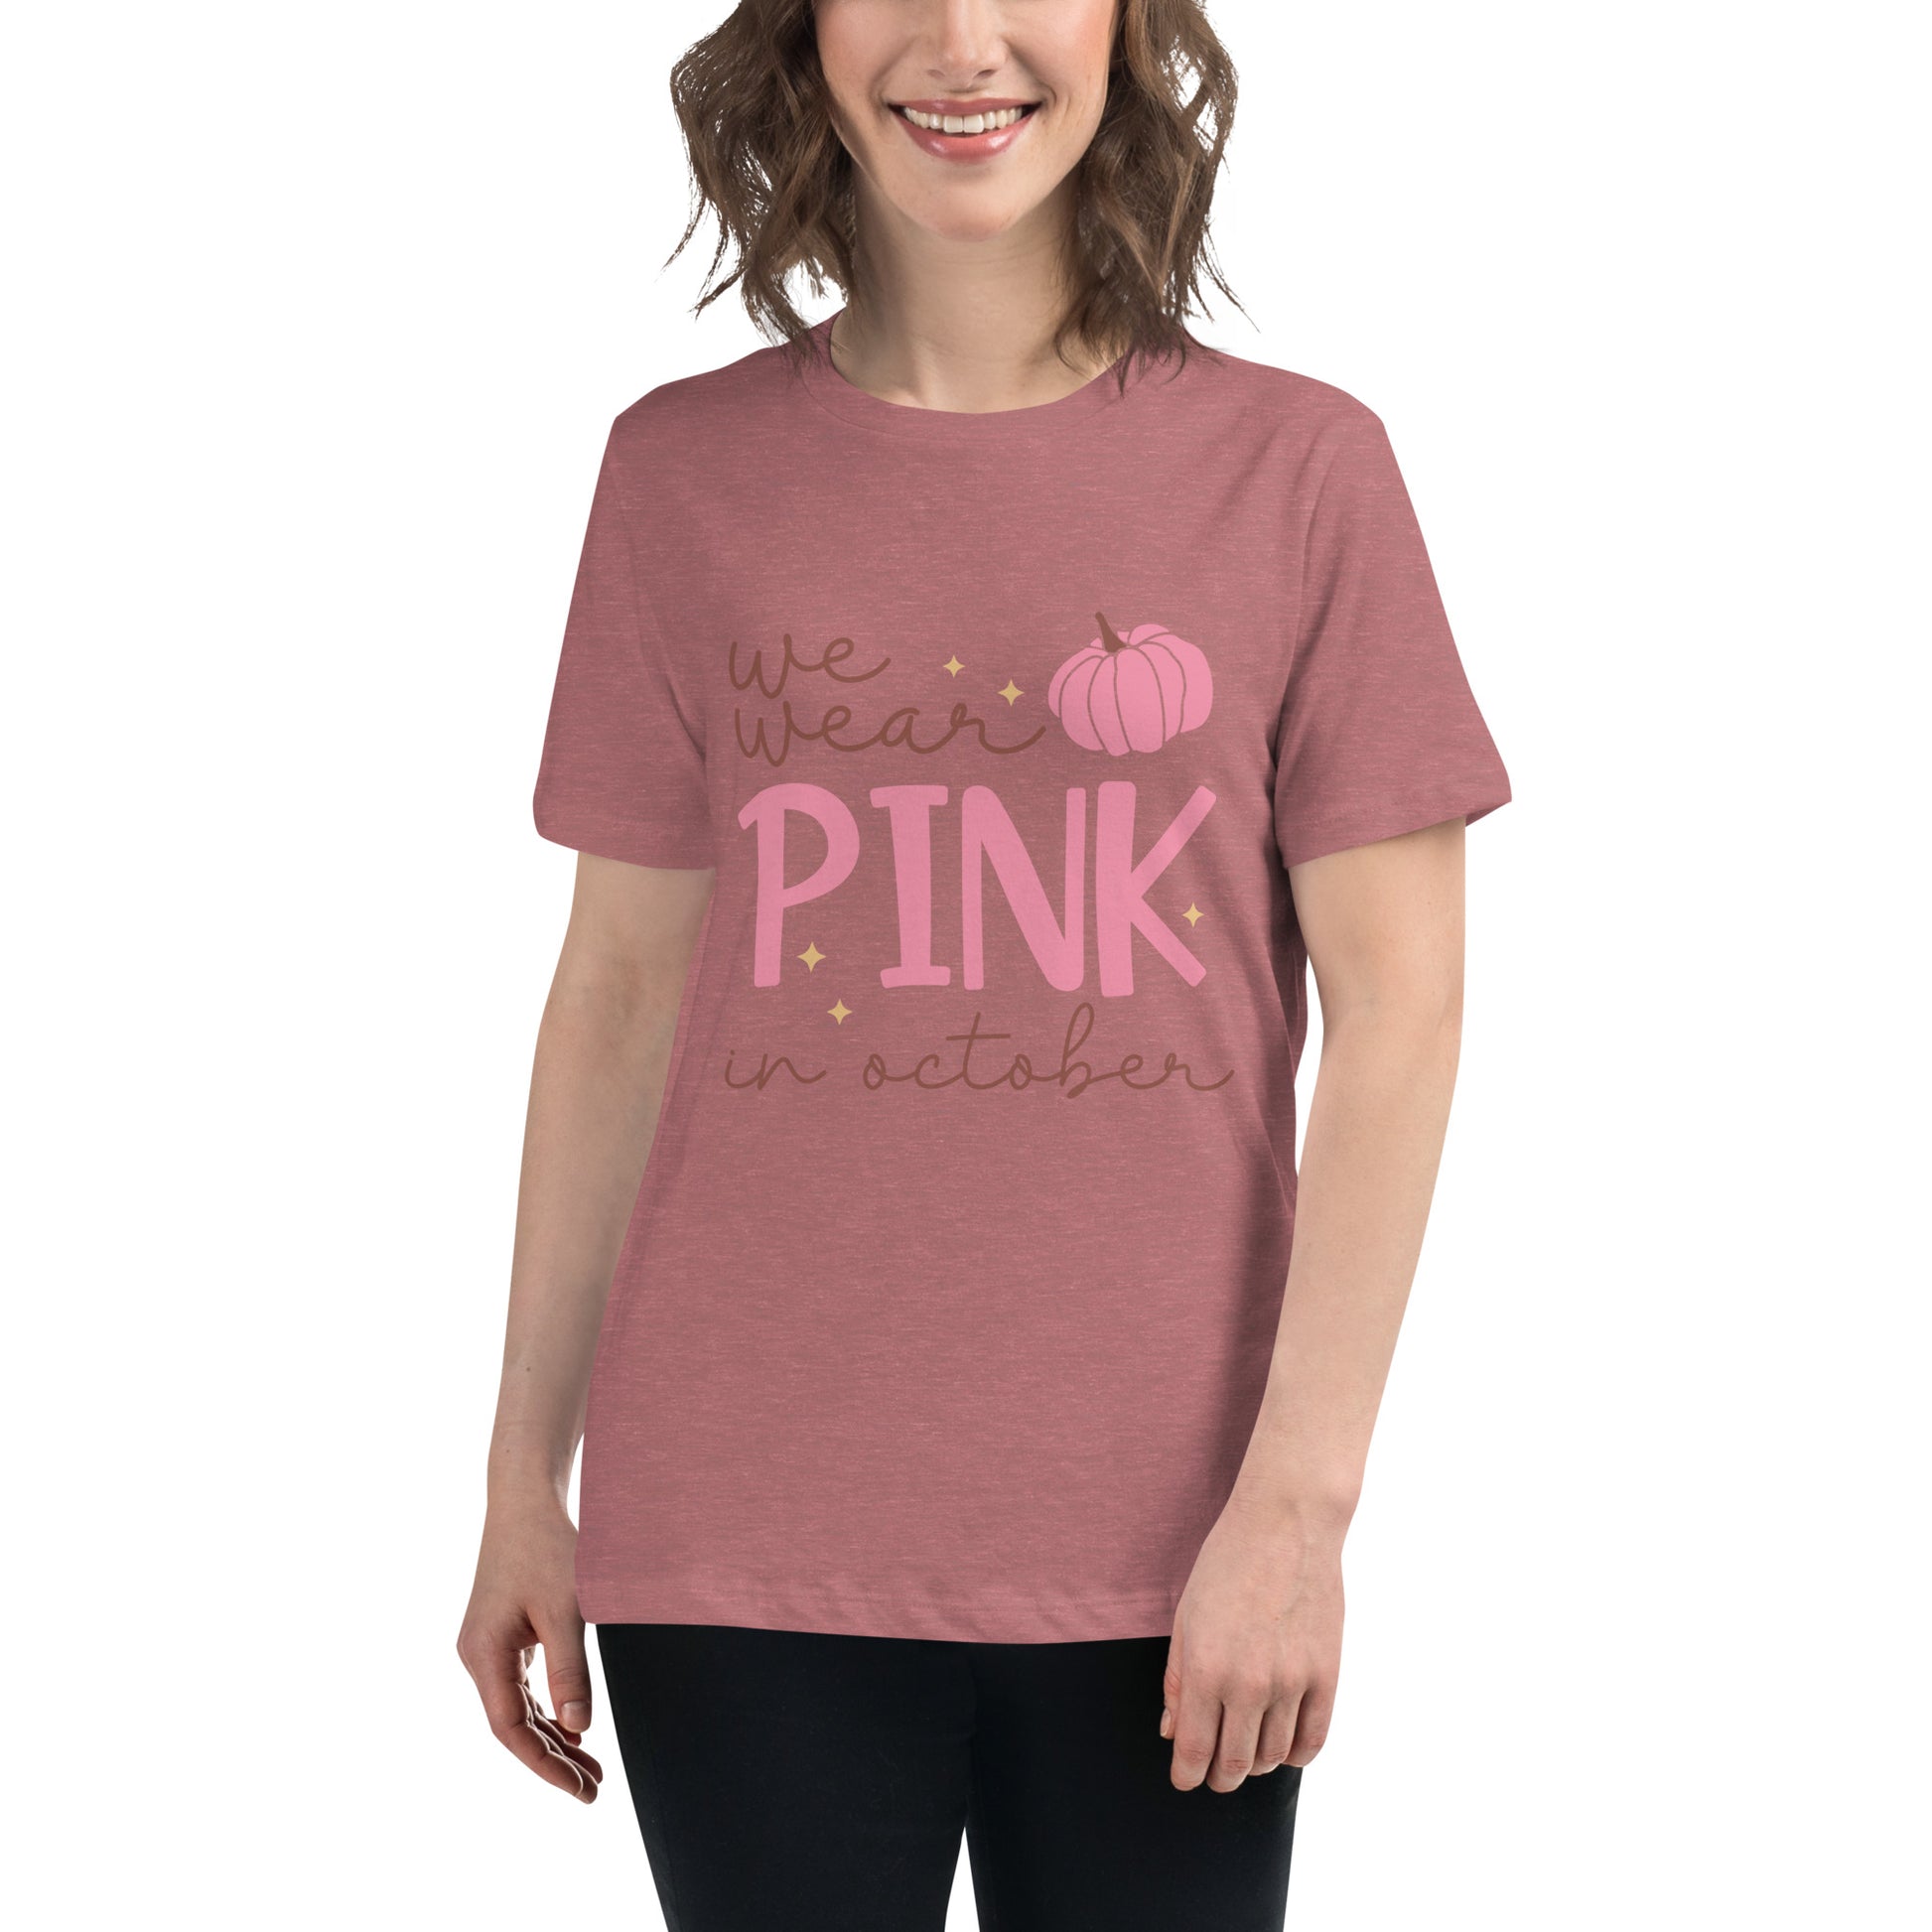 We Wear Pink in October Breast Cancer Awareness Women's Relaxed T-Shirt Tee Tshirt